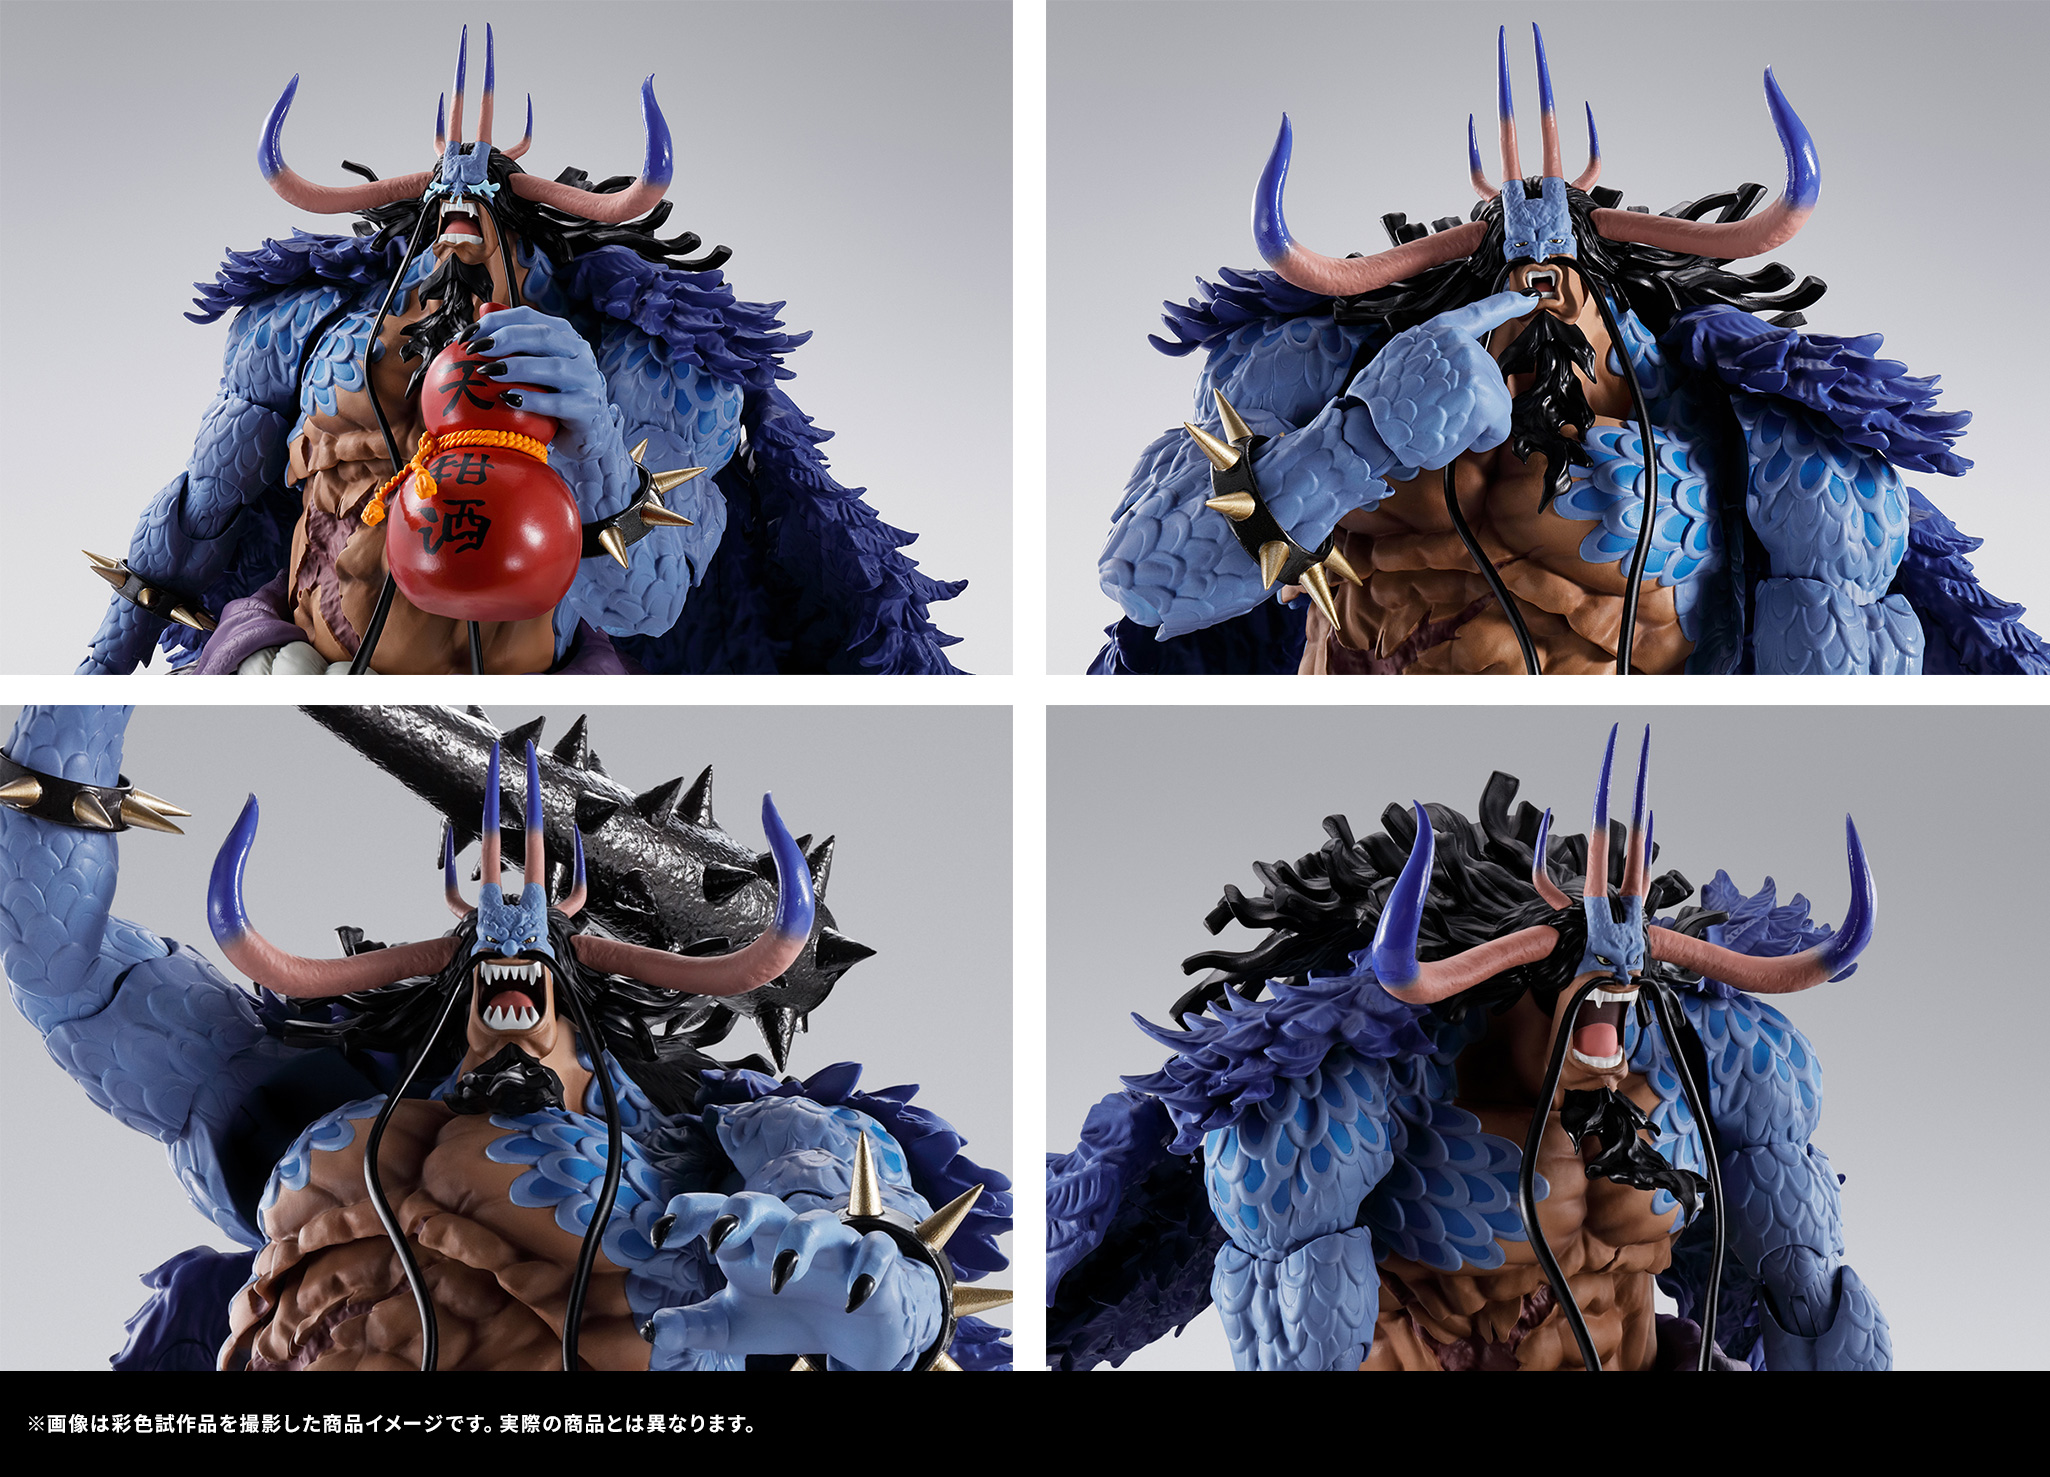 KAIDO King of the Beasts (Man-Beast form) and YAMATO from the Wano Country arc of &quot;One Piece&quot; are coming to S.H.Figuarts. Let&#39;s check out the awesome features of both items! 